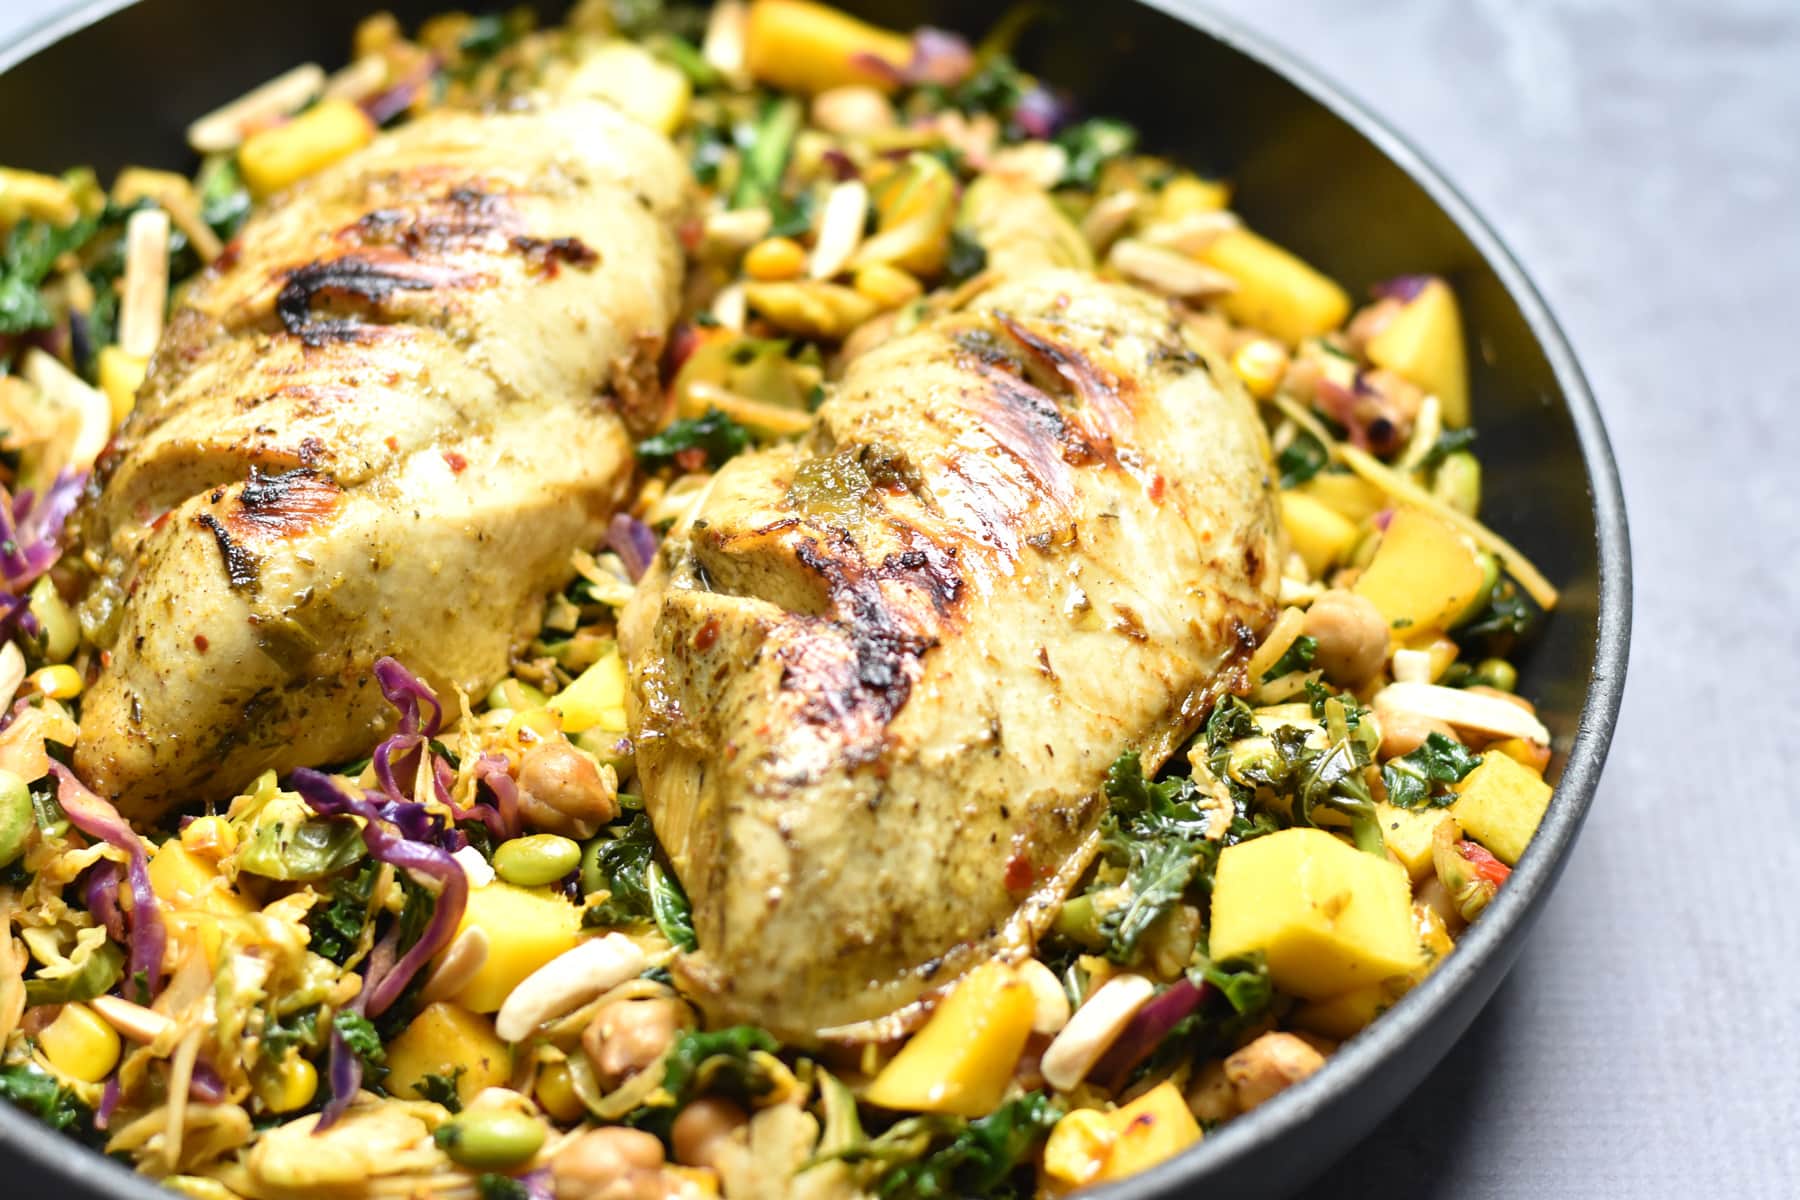 Skillet with grilled chicken breast surrounded by kale and mango salad